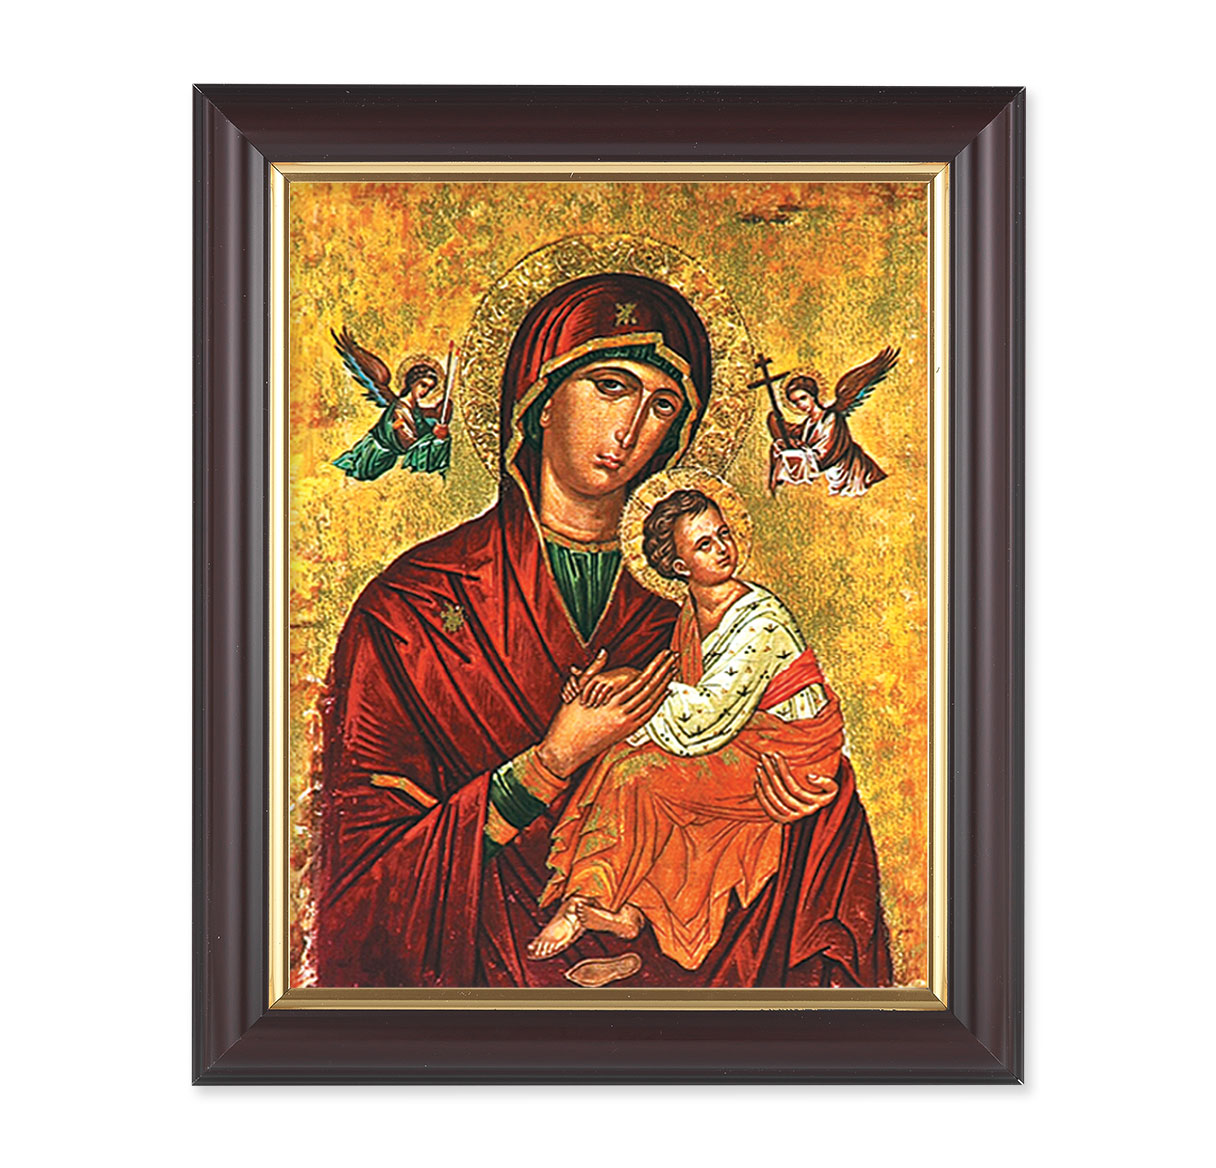 Our Lady of Passion Walnut Framed Art